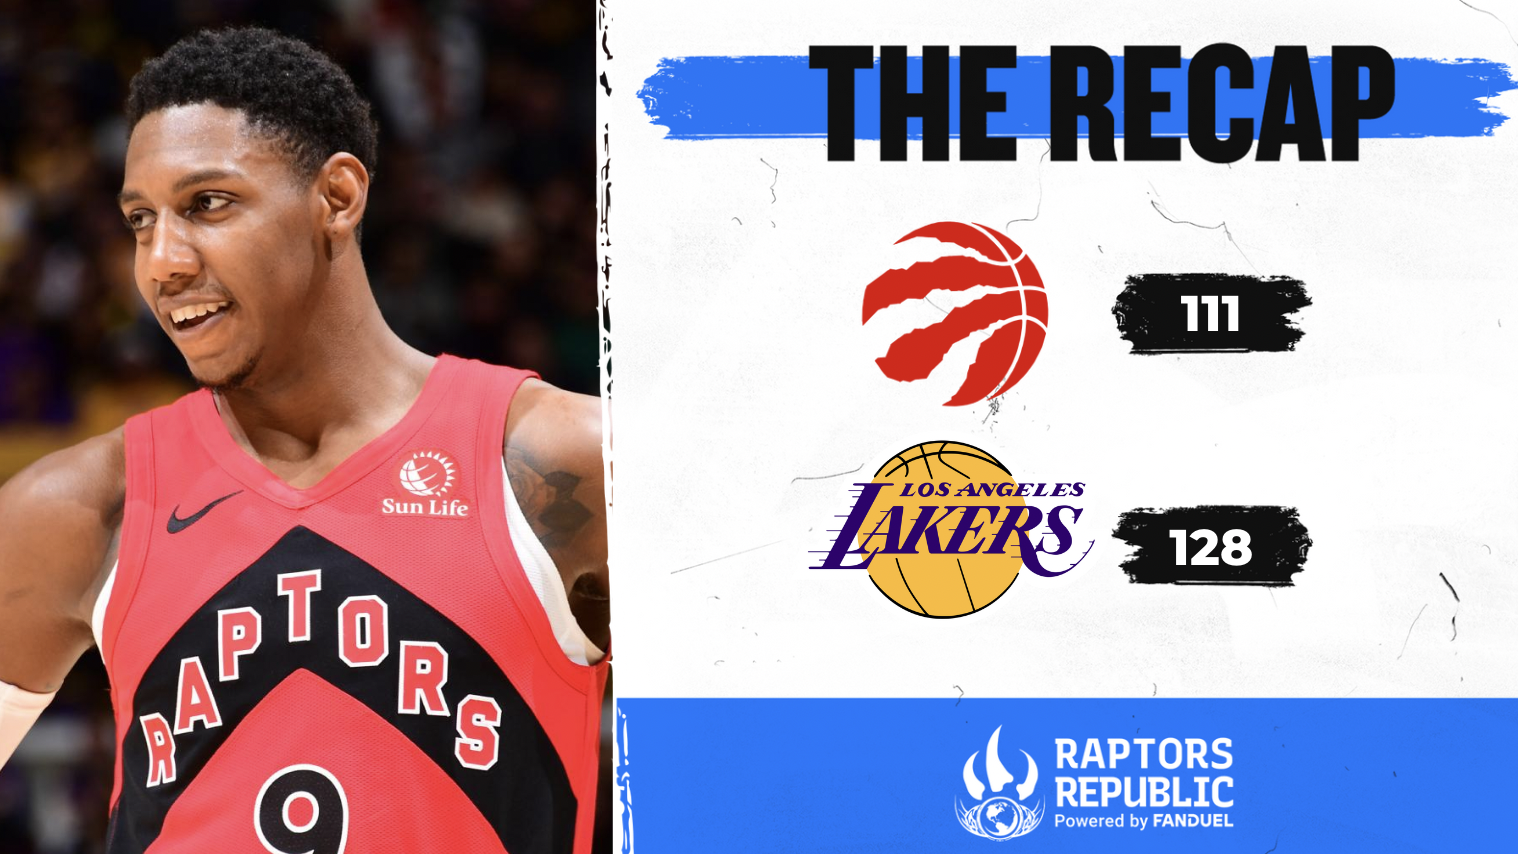 Raptors lose once again in blowout to Lakers